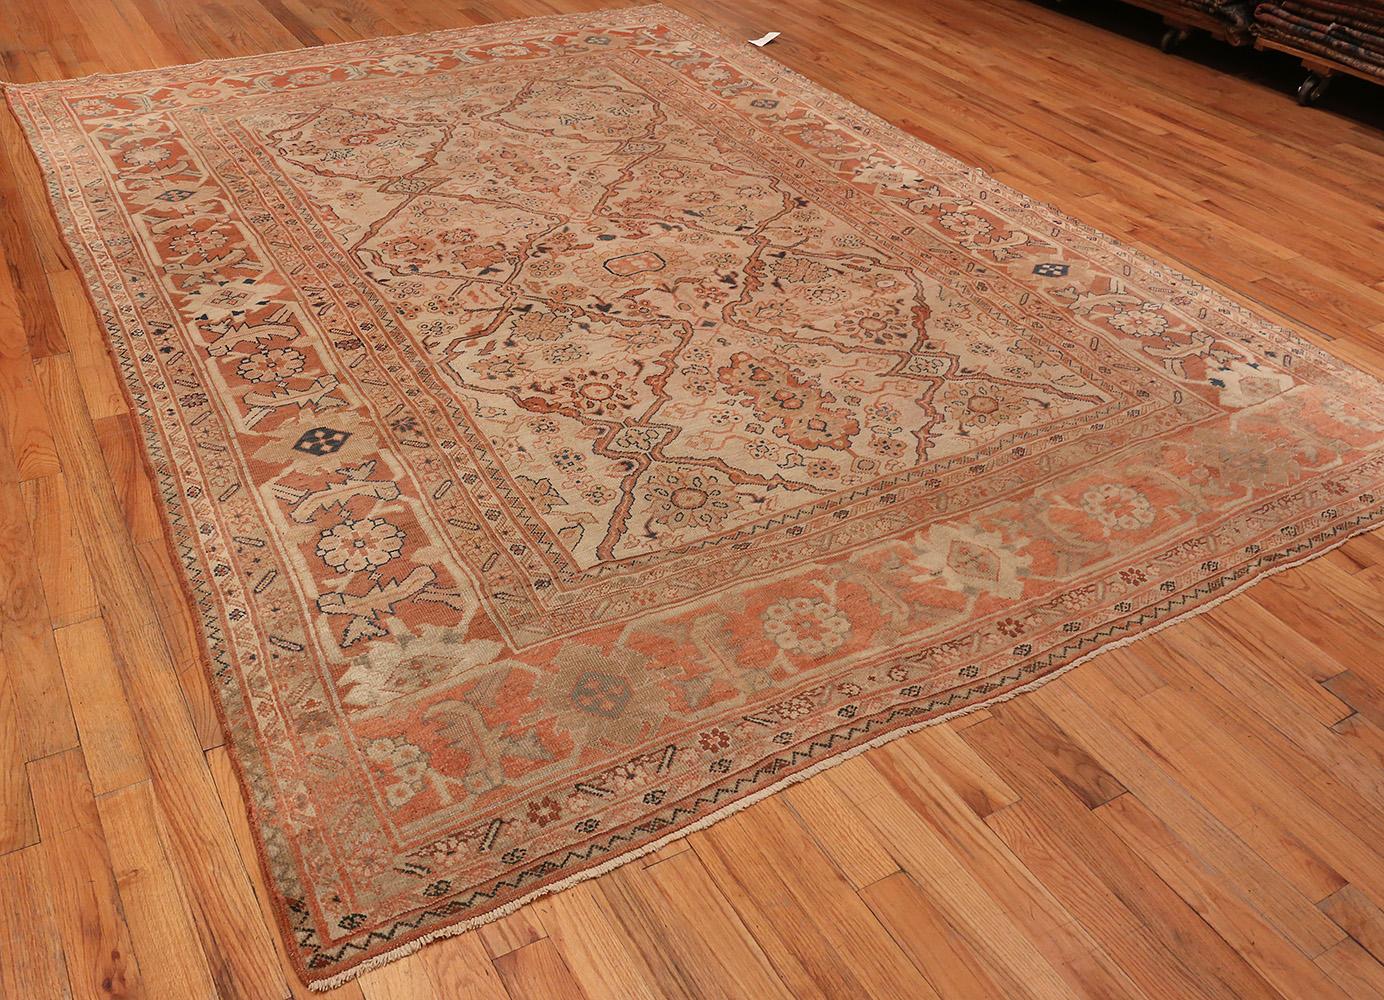 Antique Ivory Background Persian Sultanabad Rug, Country Of Origin: Persia, Circa Date: Late 19th Century. Size: 8 ft 10 in x 12 ft (2.69 m x 3.66 m)

This antique Persian rug, a beautiful antique Sultanabad rug, features a central ivory field with